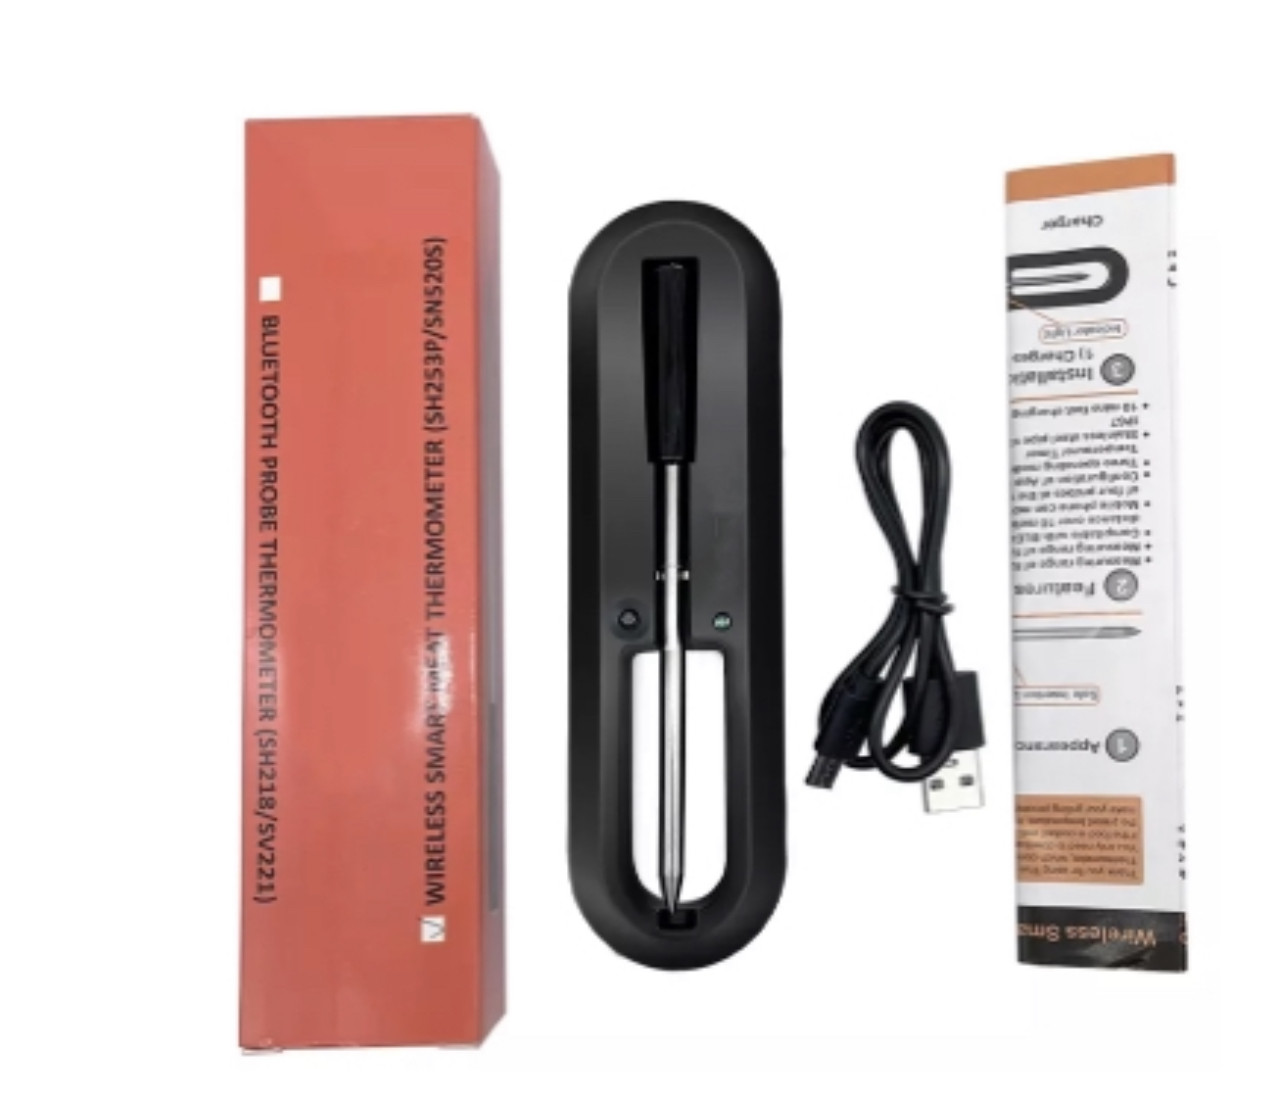 Wireless Probe for Slow Cooking SH253P